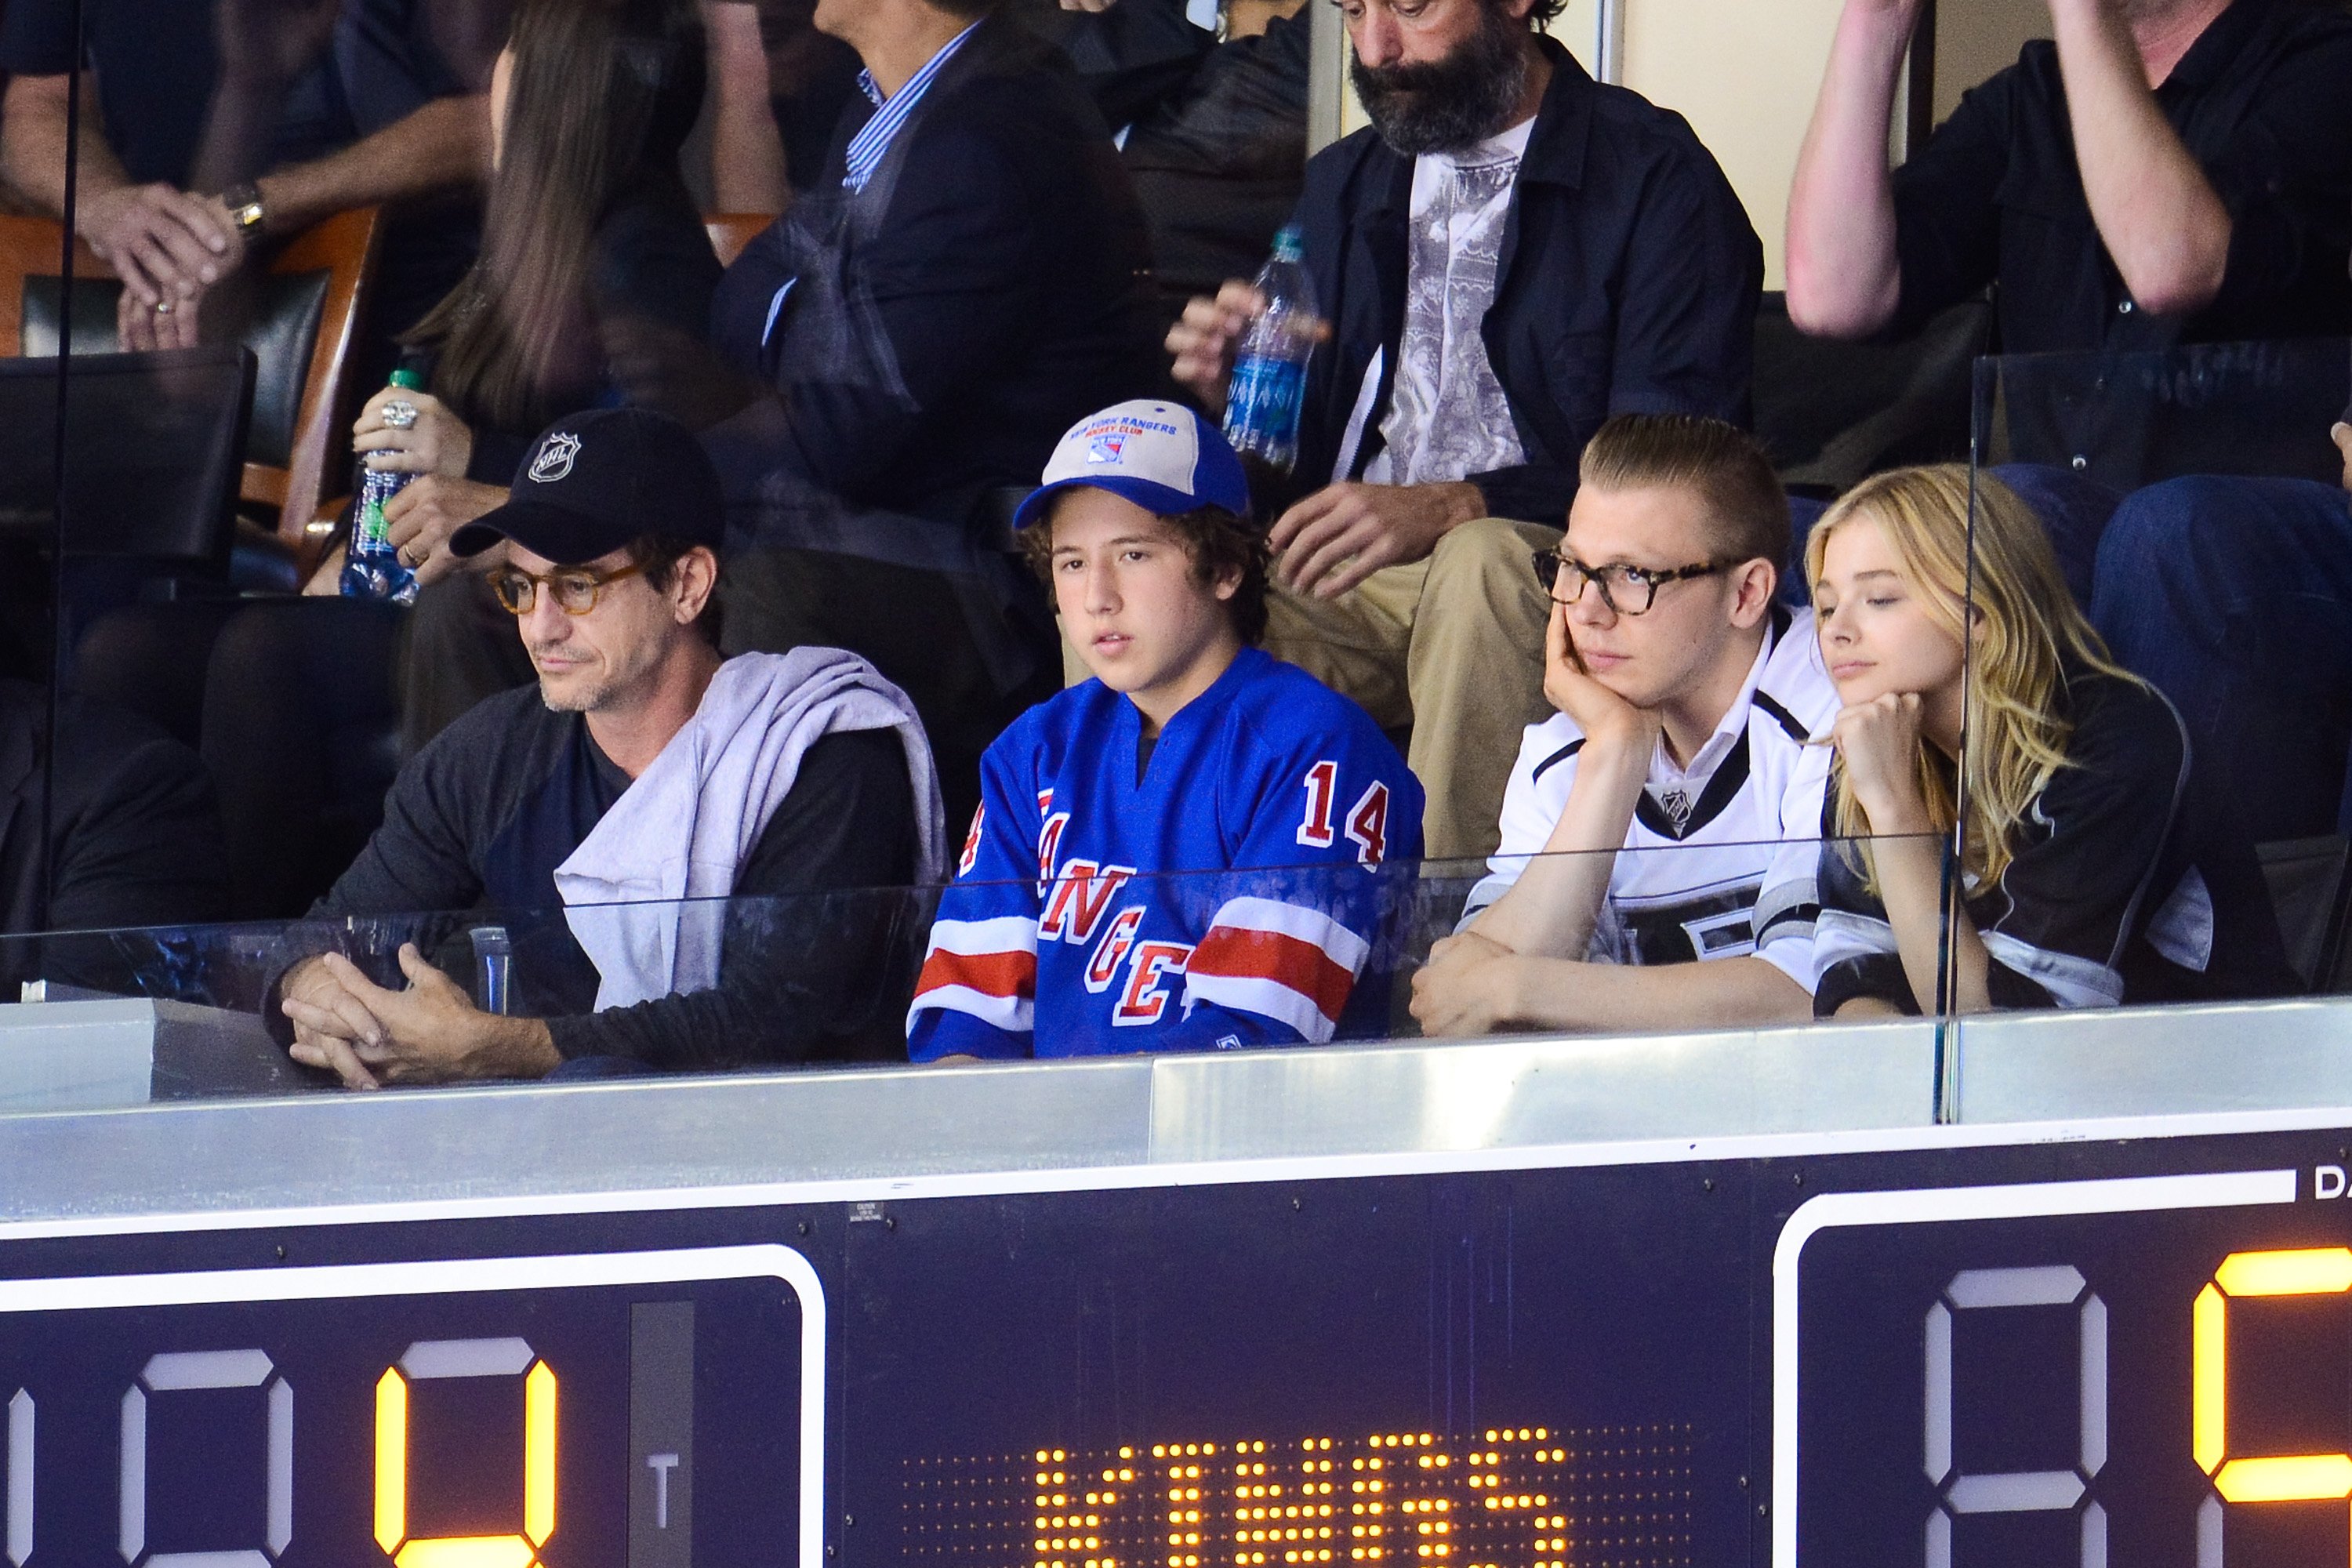  Dermot Mulroney, Clyde Mulroney, Ethan Moretz and Chloe Moretz attend a hockey game between the New York Rangers and the Los Angeles Kings on June 7, 2014, in Los Angeles, California. | Source: Getty Images